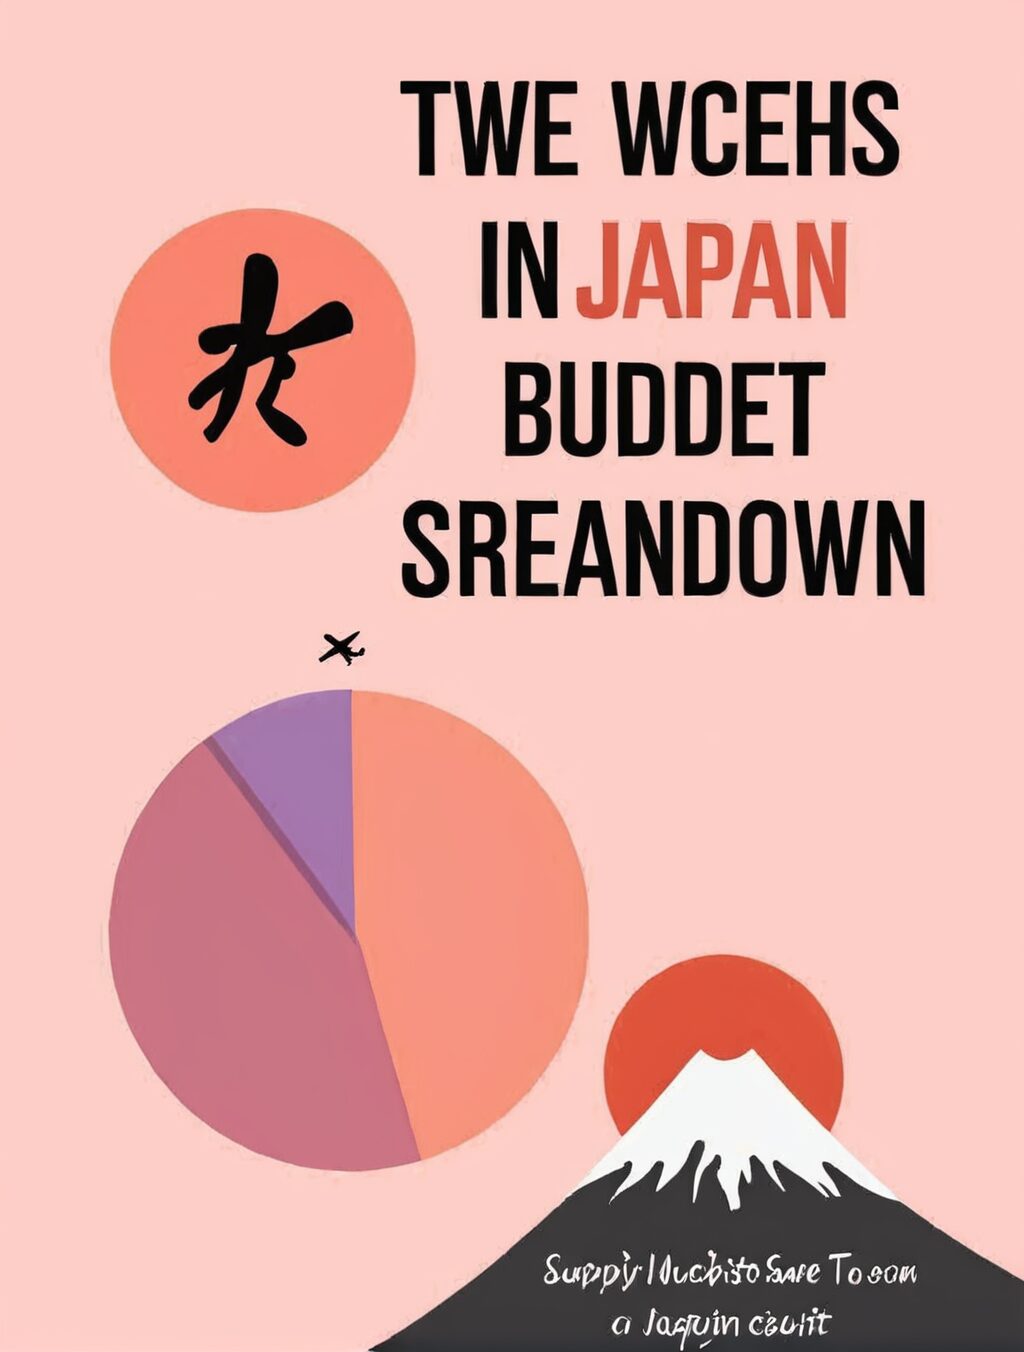 how much to save for a trip to japan reddit